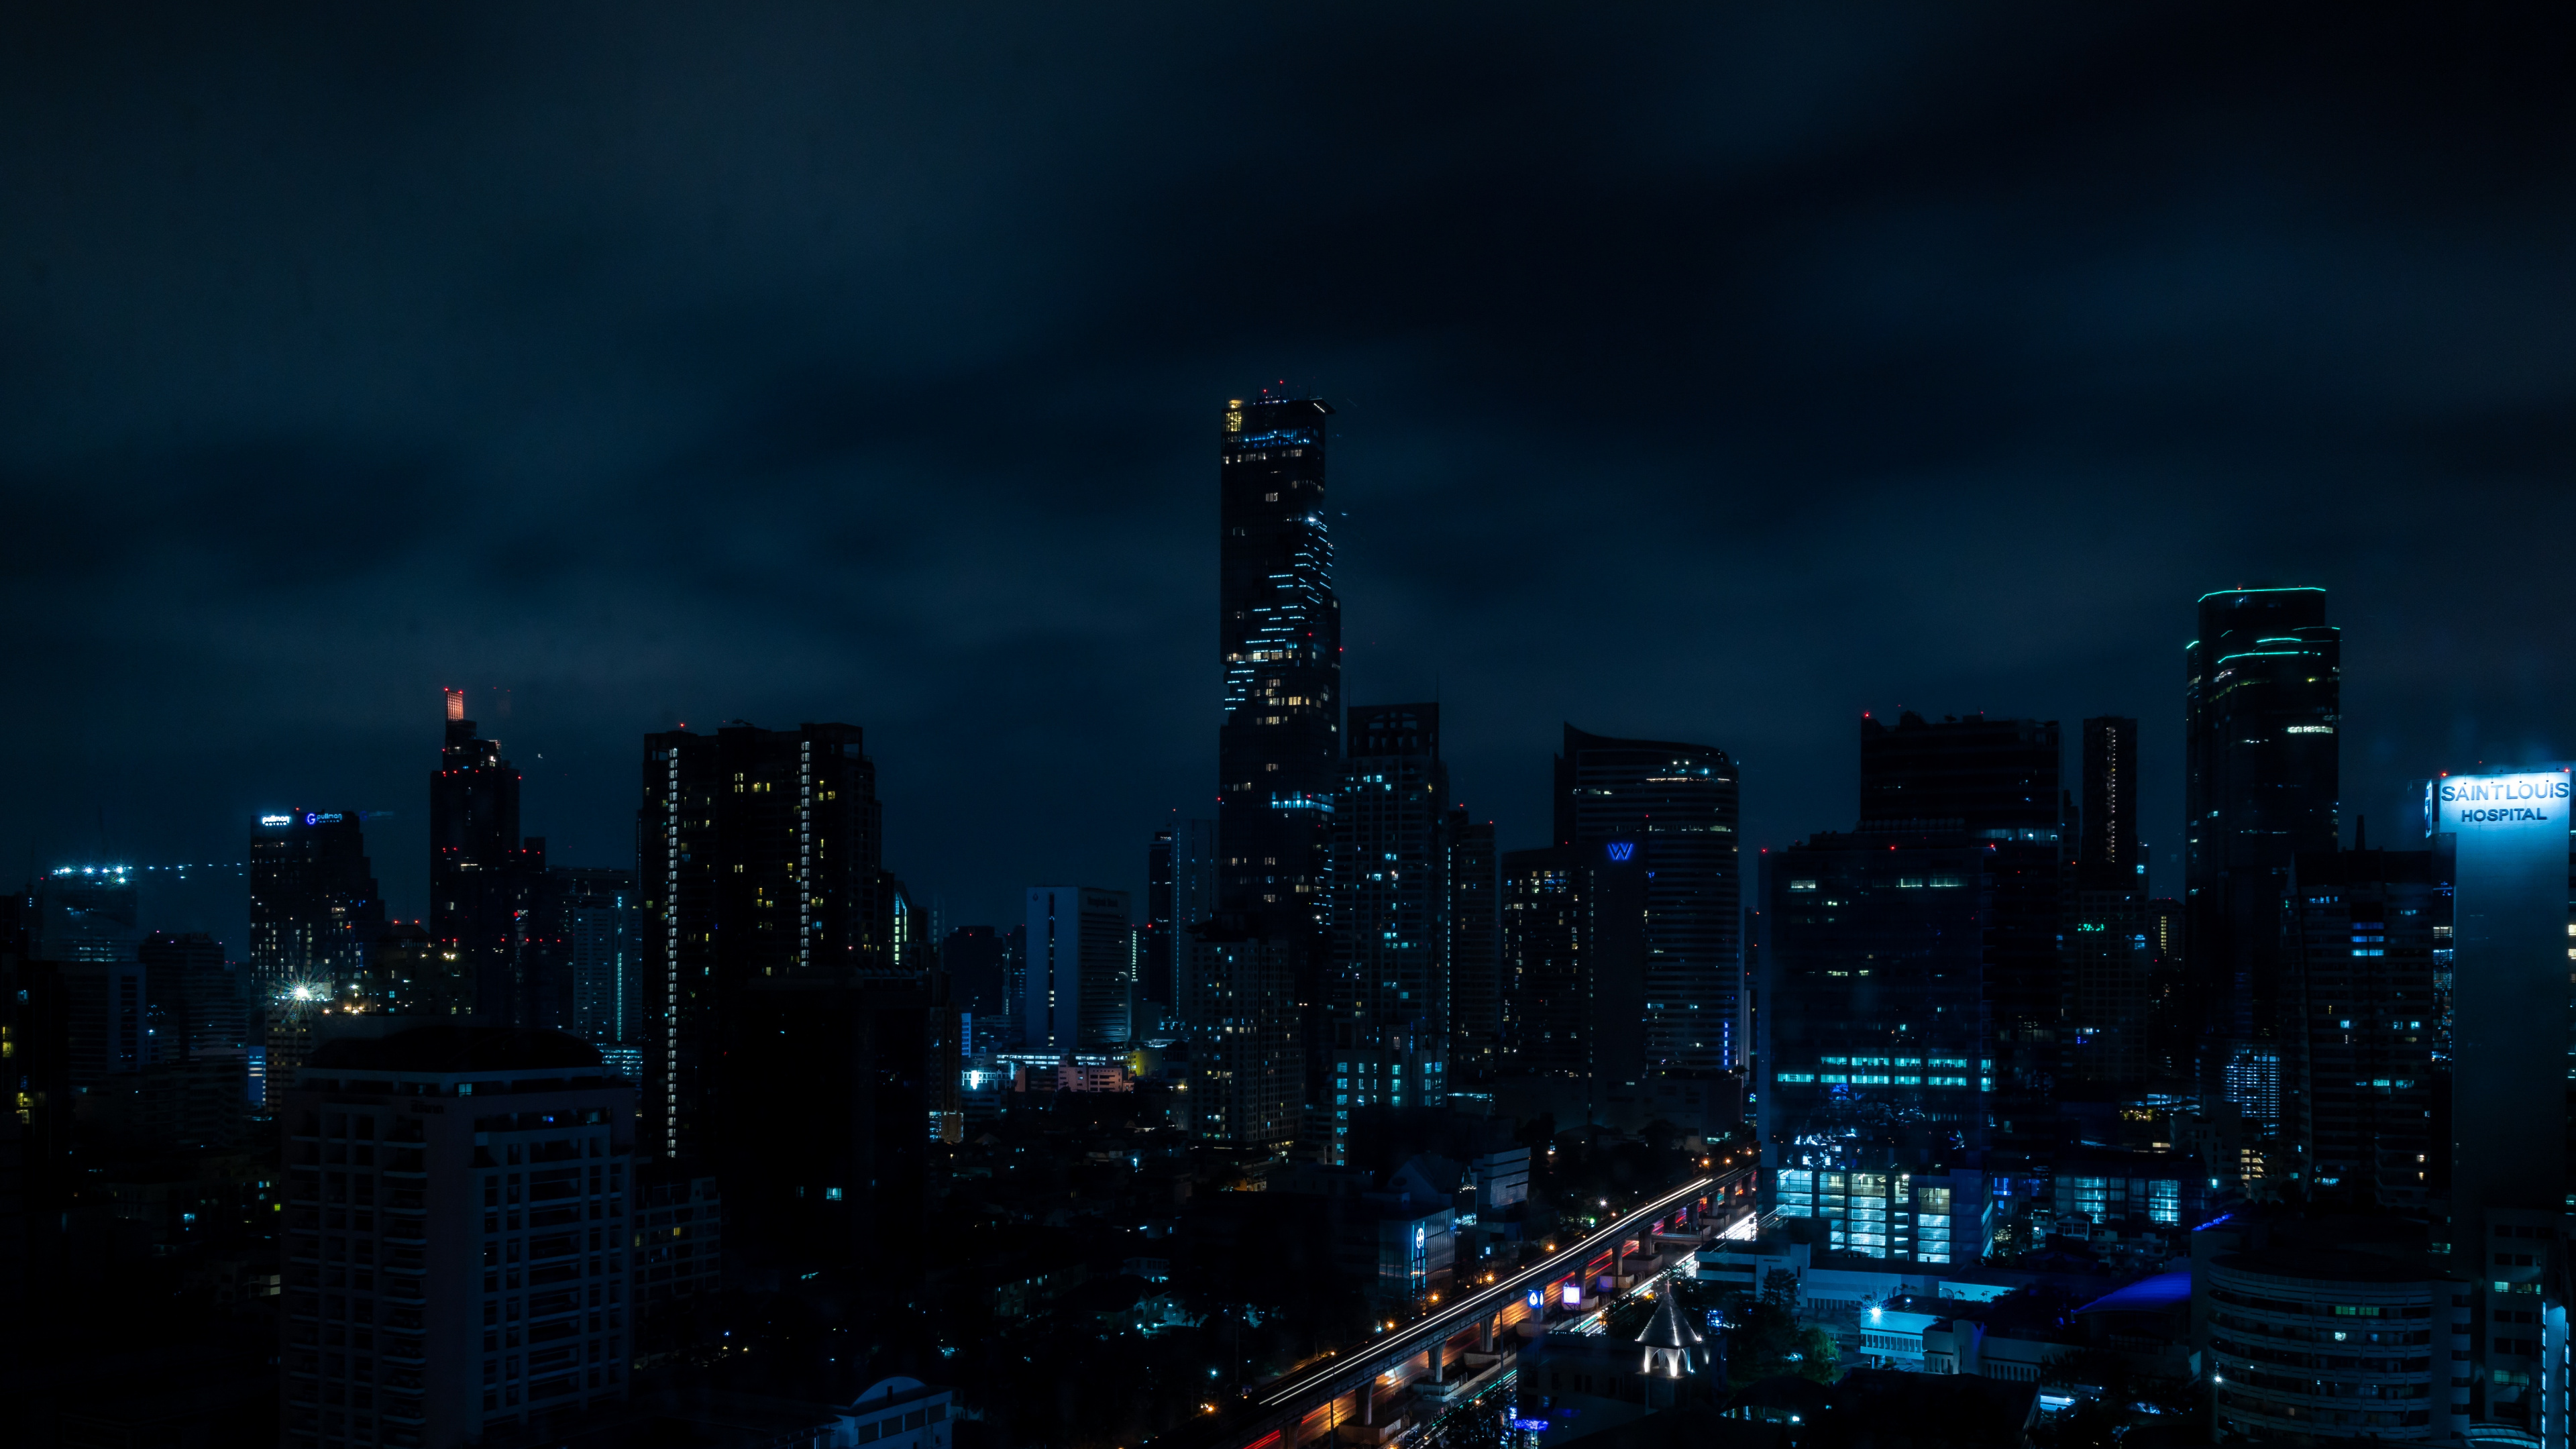 City Skyline During Night Time. Wallpaper in 3840x2160 Resolution